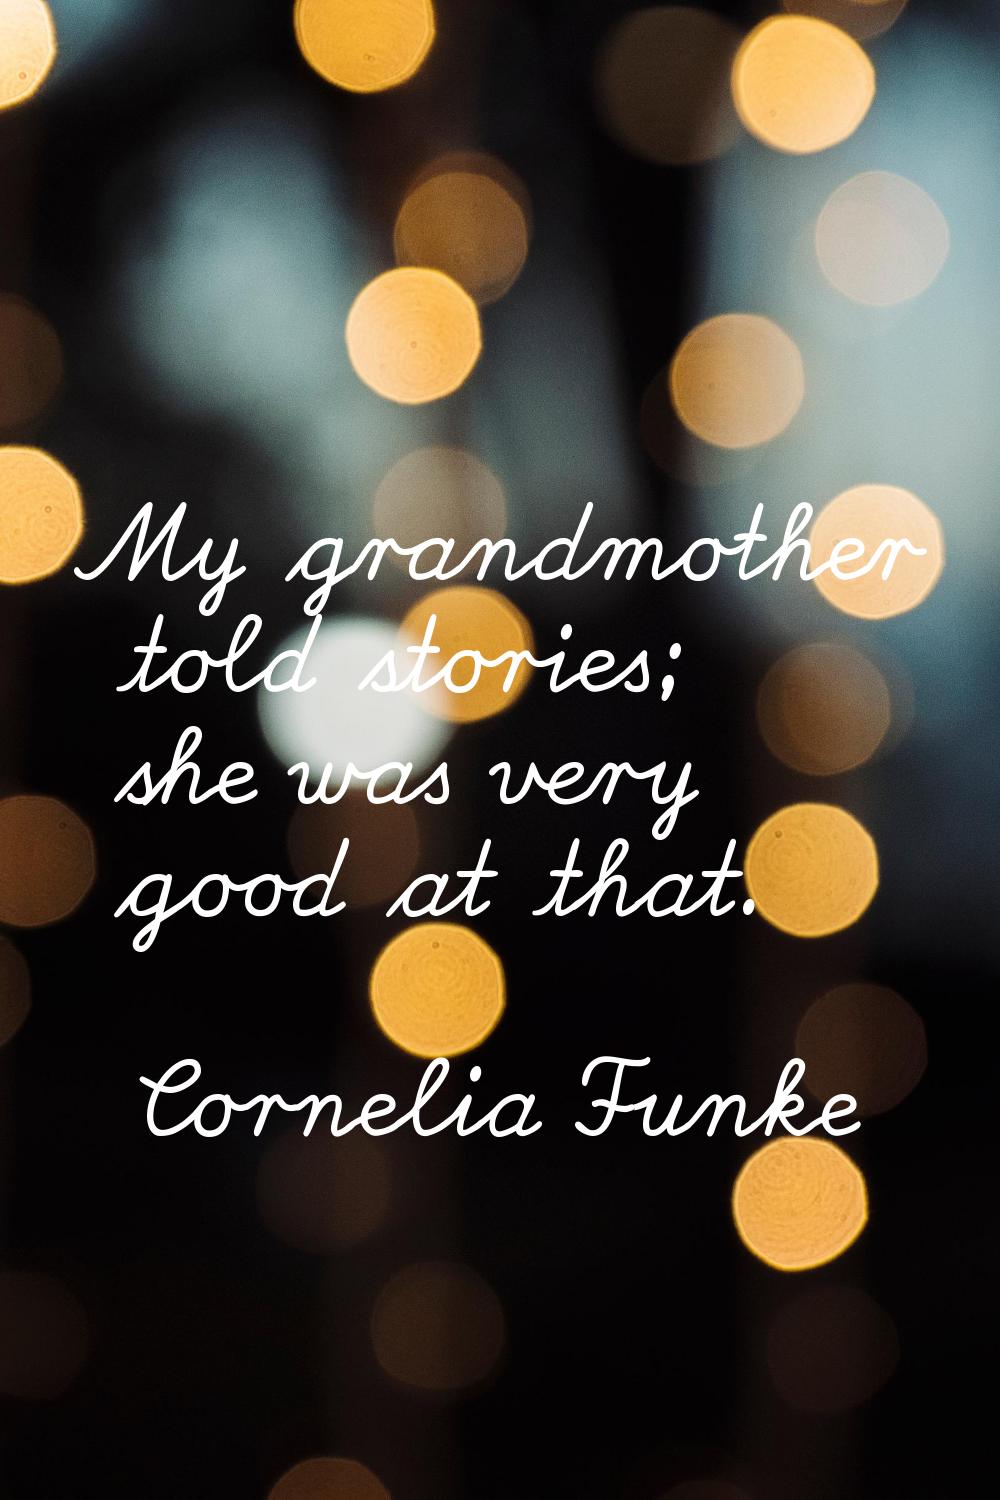 My grandmother told stories; she was very good at that.